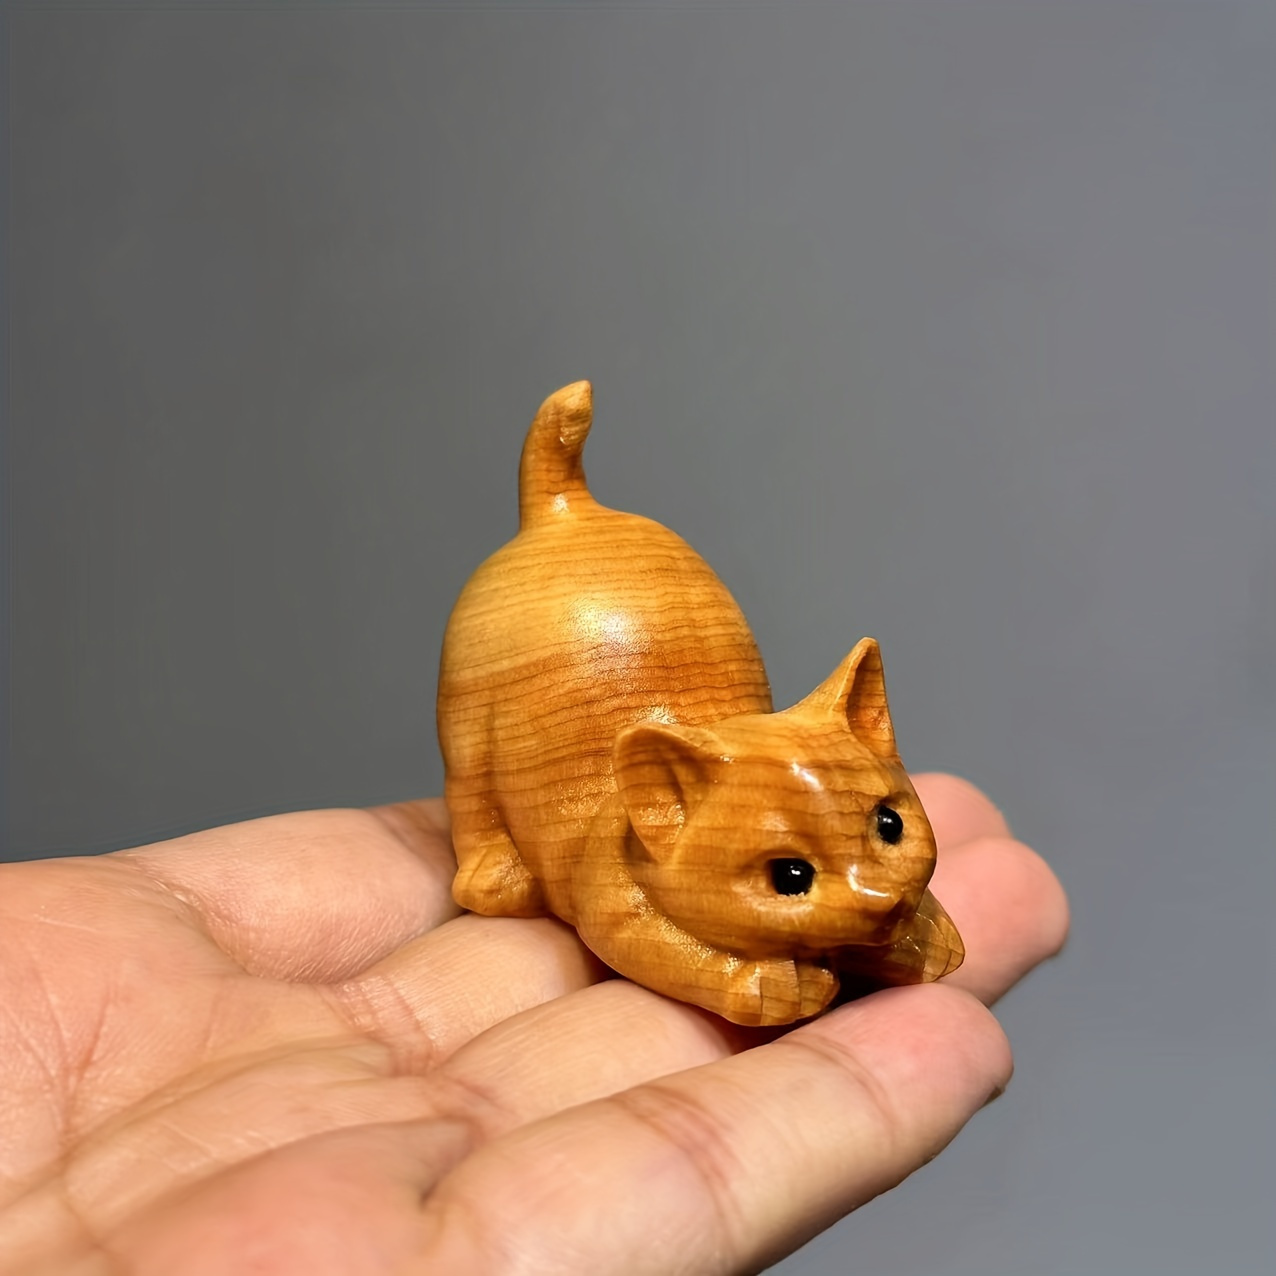 

Handcrafted Wooden Cat Figurine - Artisanal Desktop Ornament, Perfect For Gifts & Home Decor